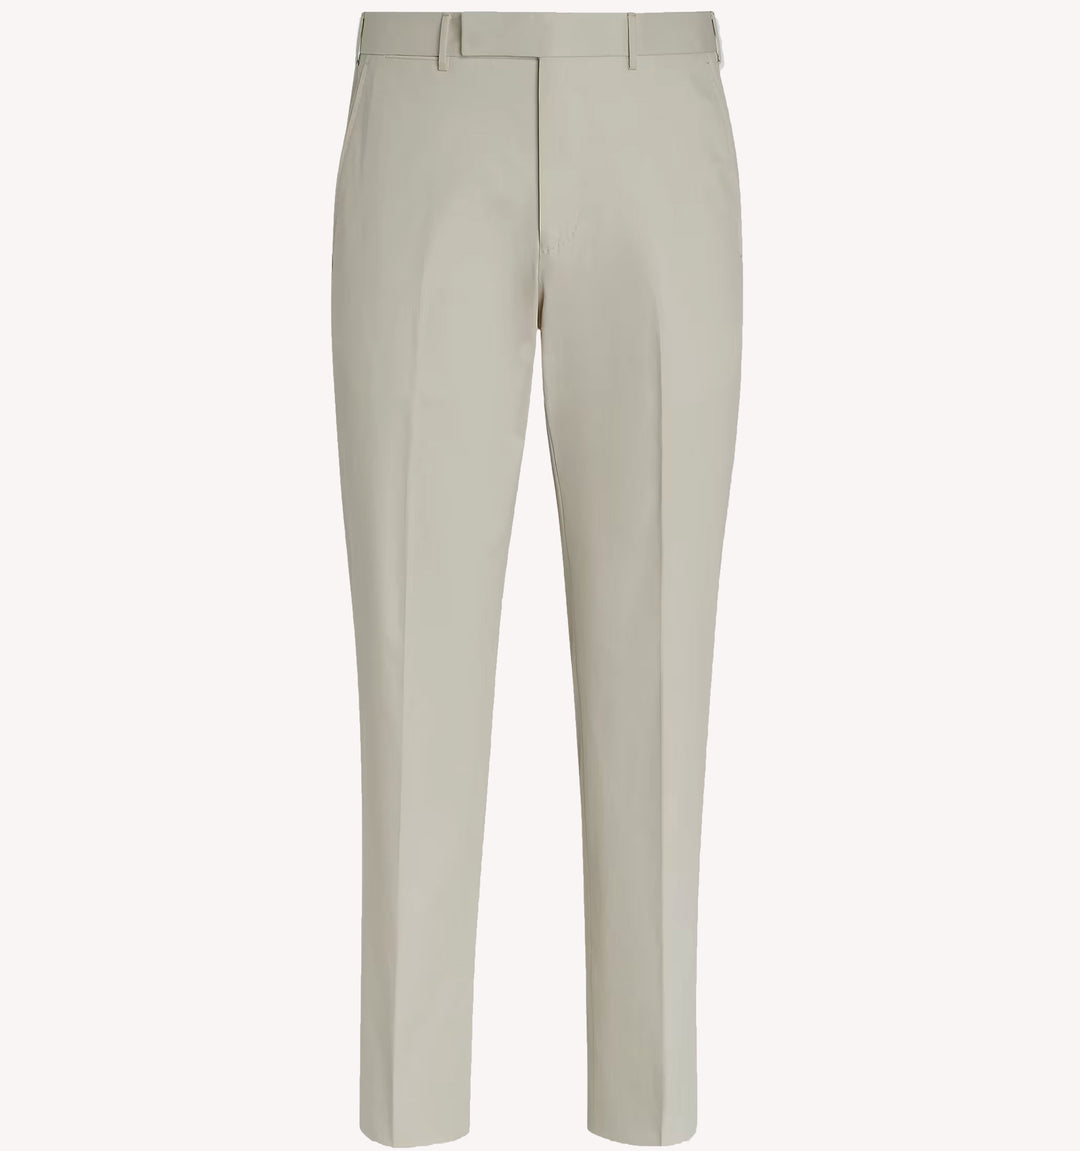 Zegna Sport Trousers in Stone